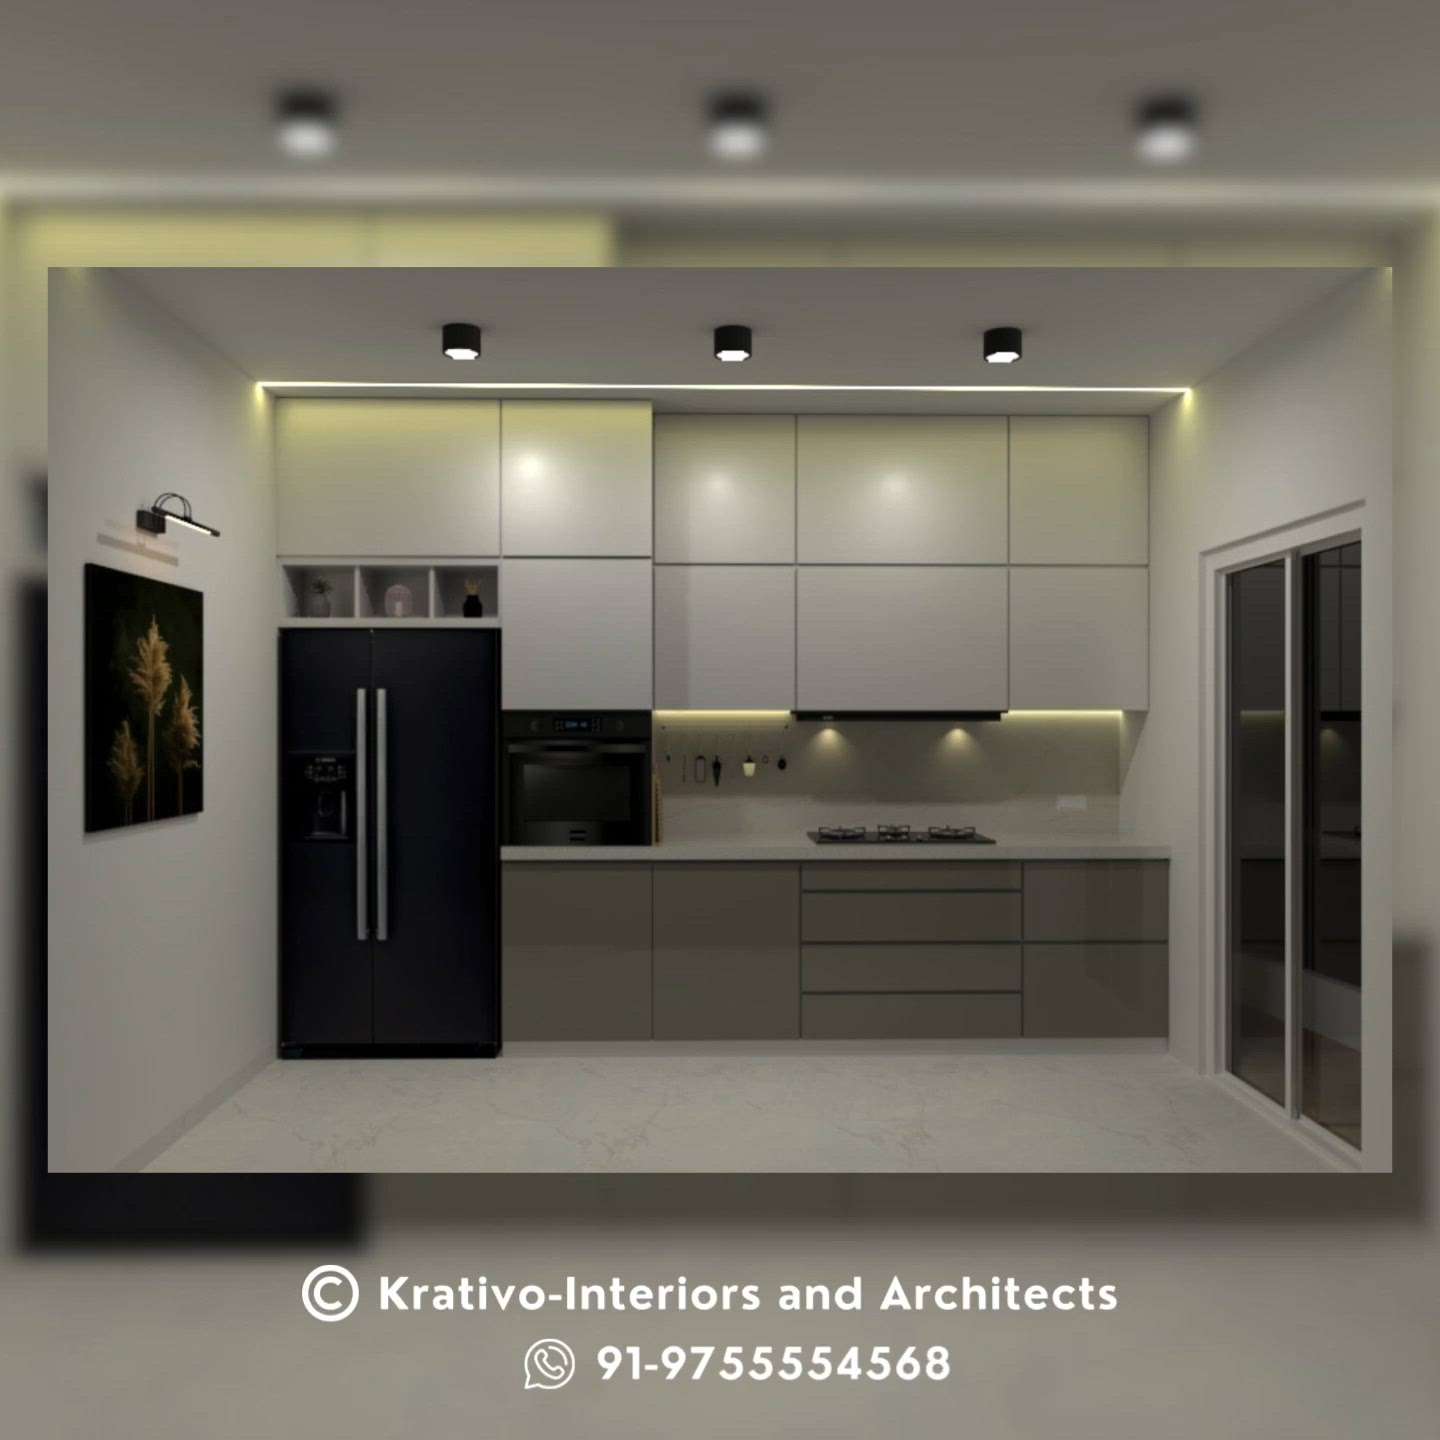 Greetings! This is a conceptual design for kitchen area in our upcoming project.
If you also want 3D design for your project, you can reach us at 9755554568.
#InteriorDesigner #ModularKitchen #KitchenIdeas #3d